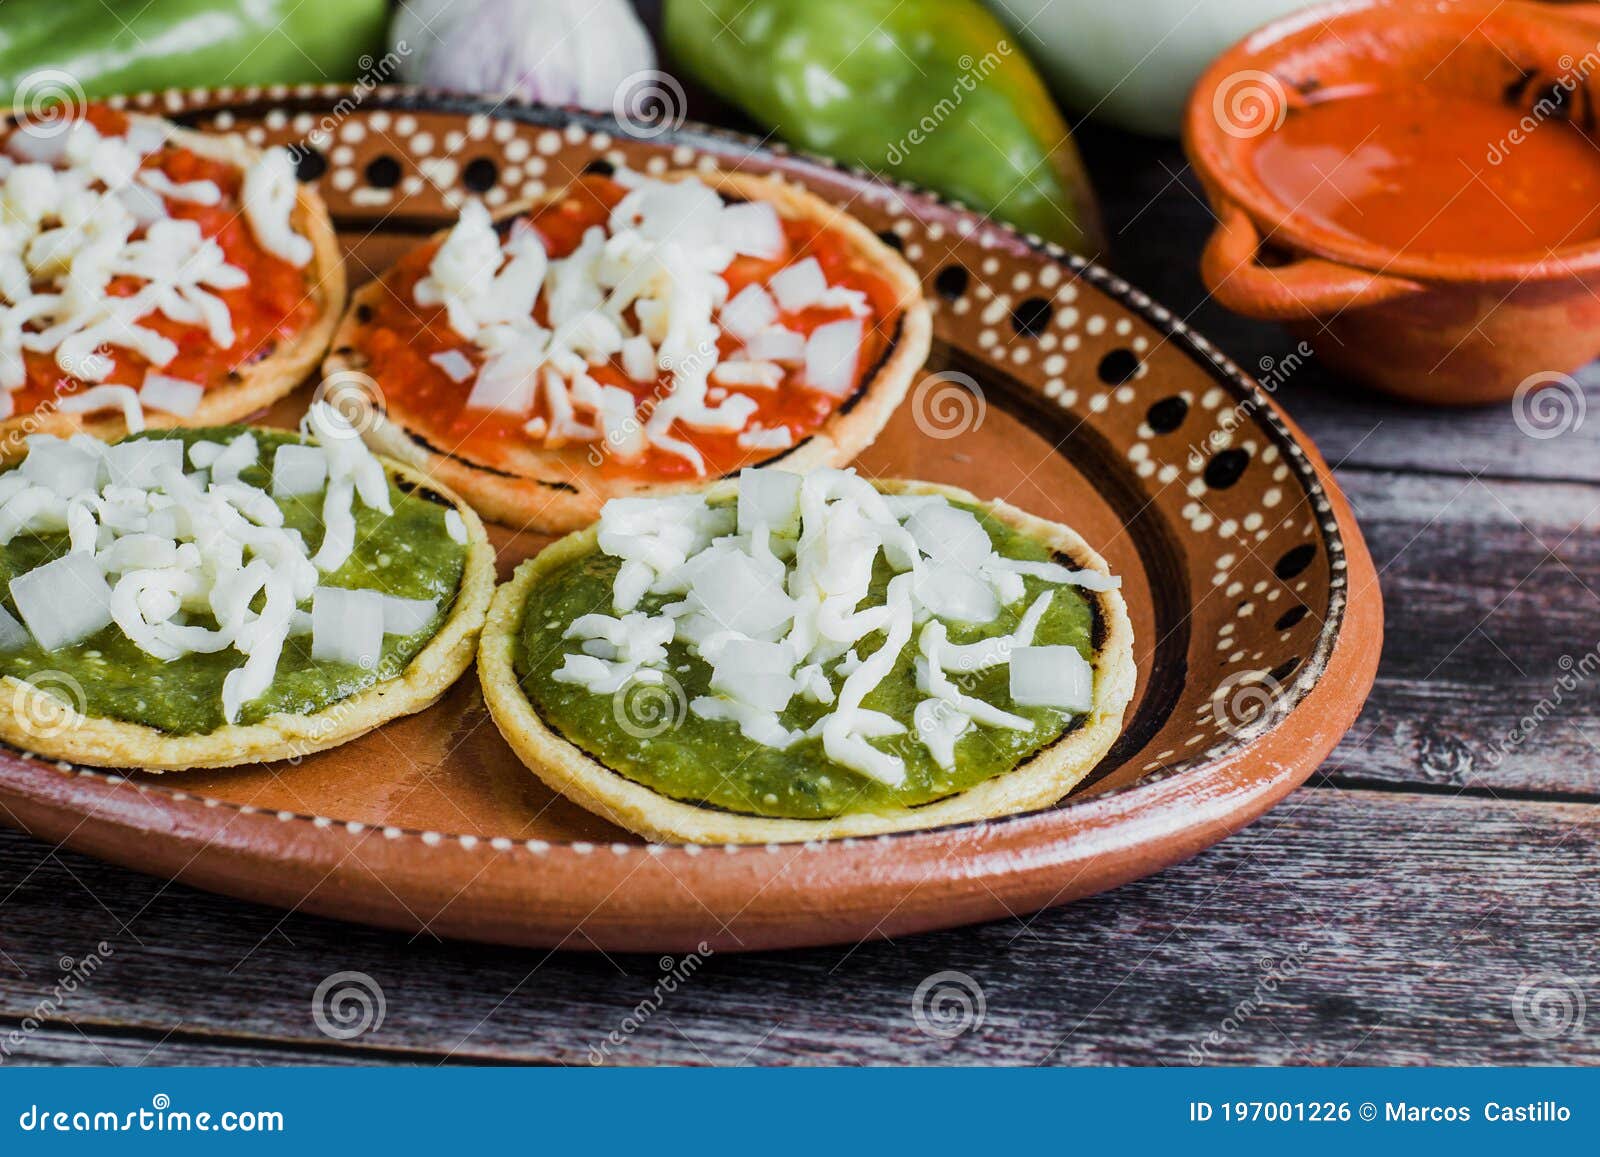 Mexcian Sopes Handmade Traditional Food in Mexico Stock Photo - Image ...